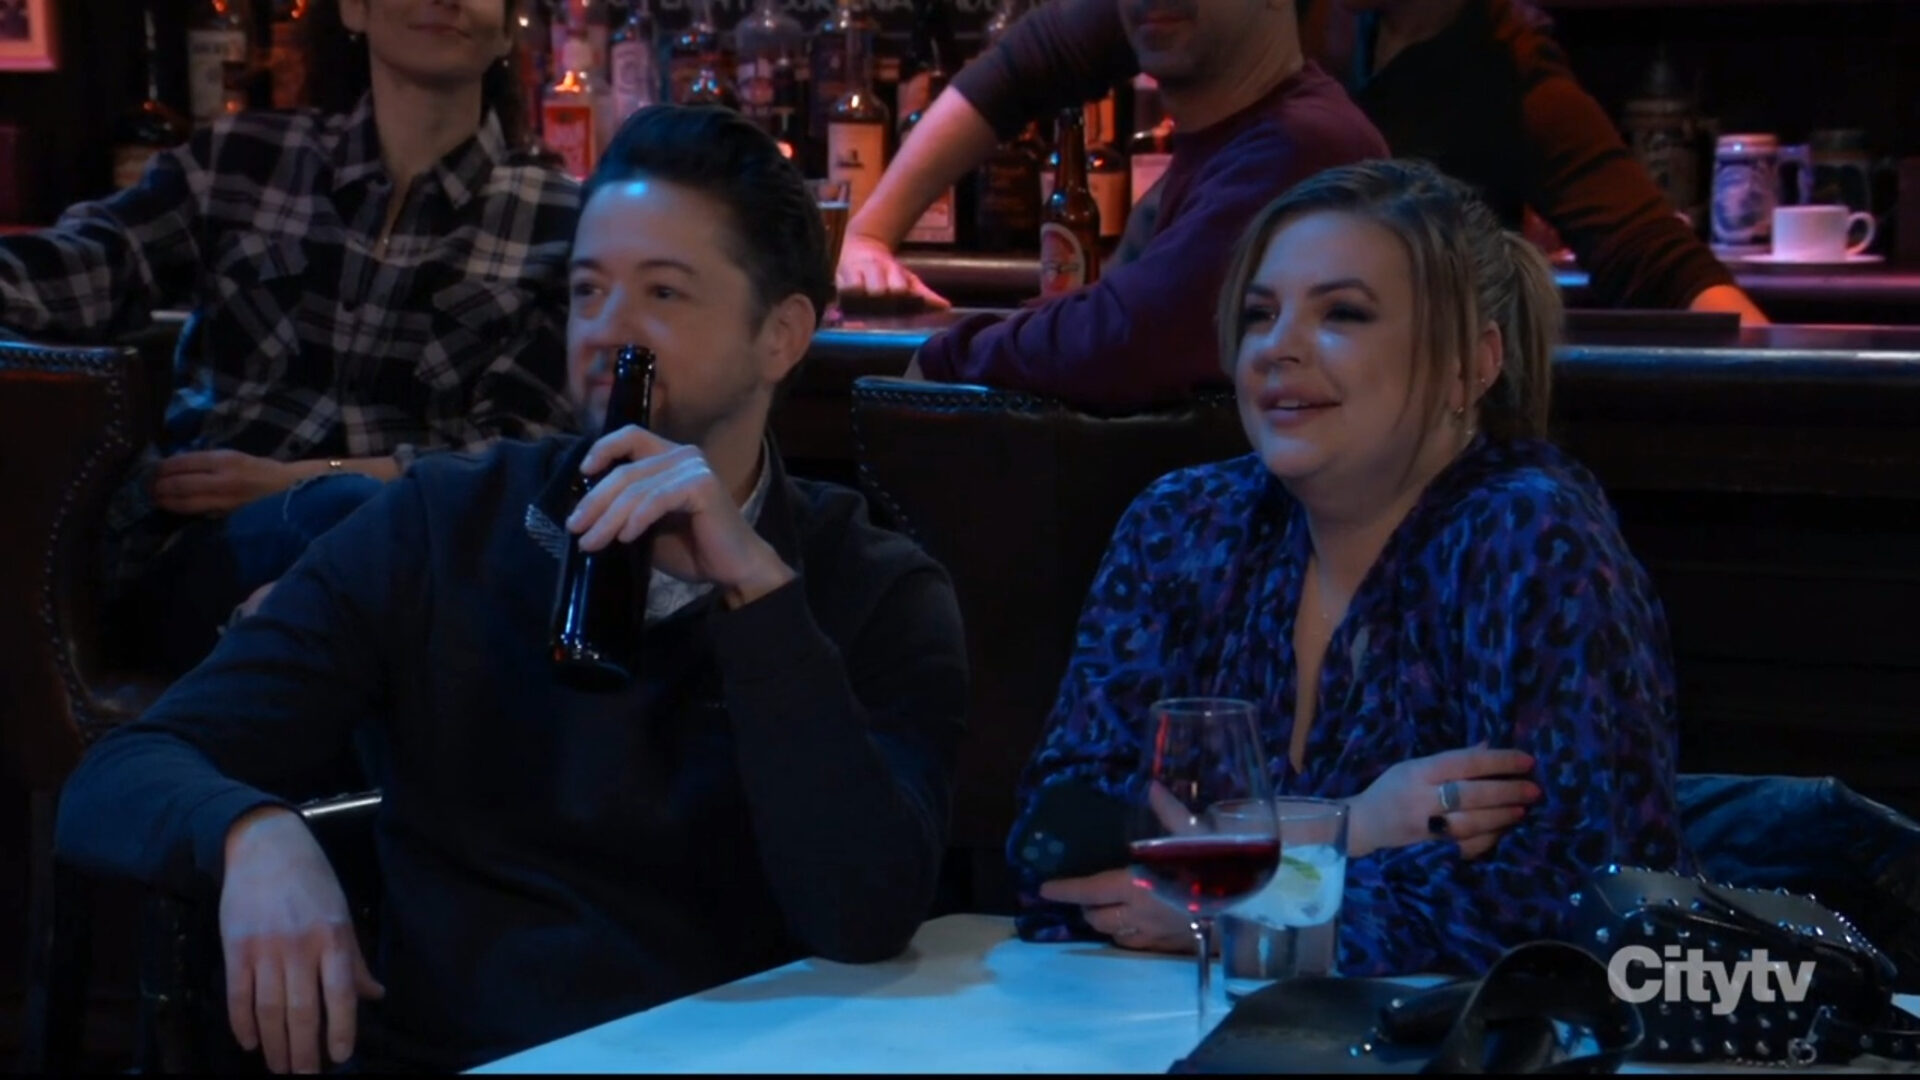 maxie and spin watch cody and sasha sing karaoke GH Recaps SoapsSpoilers